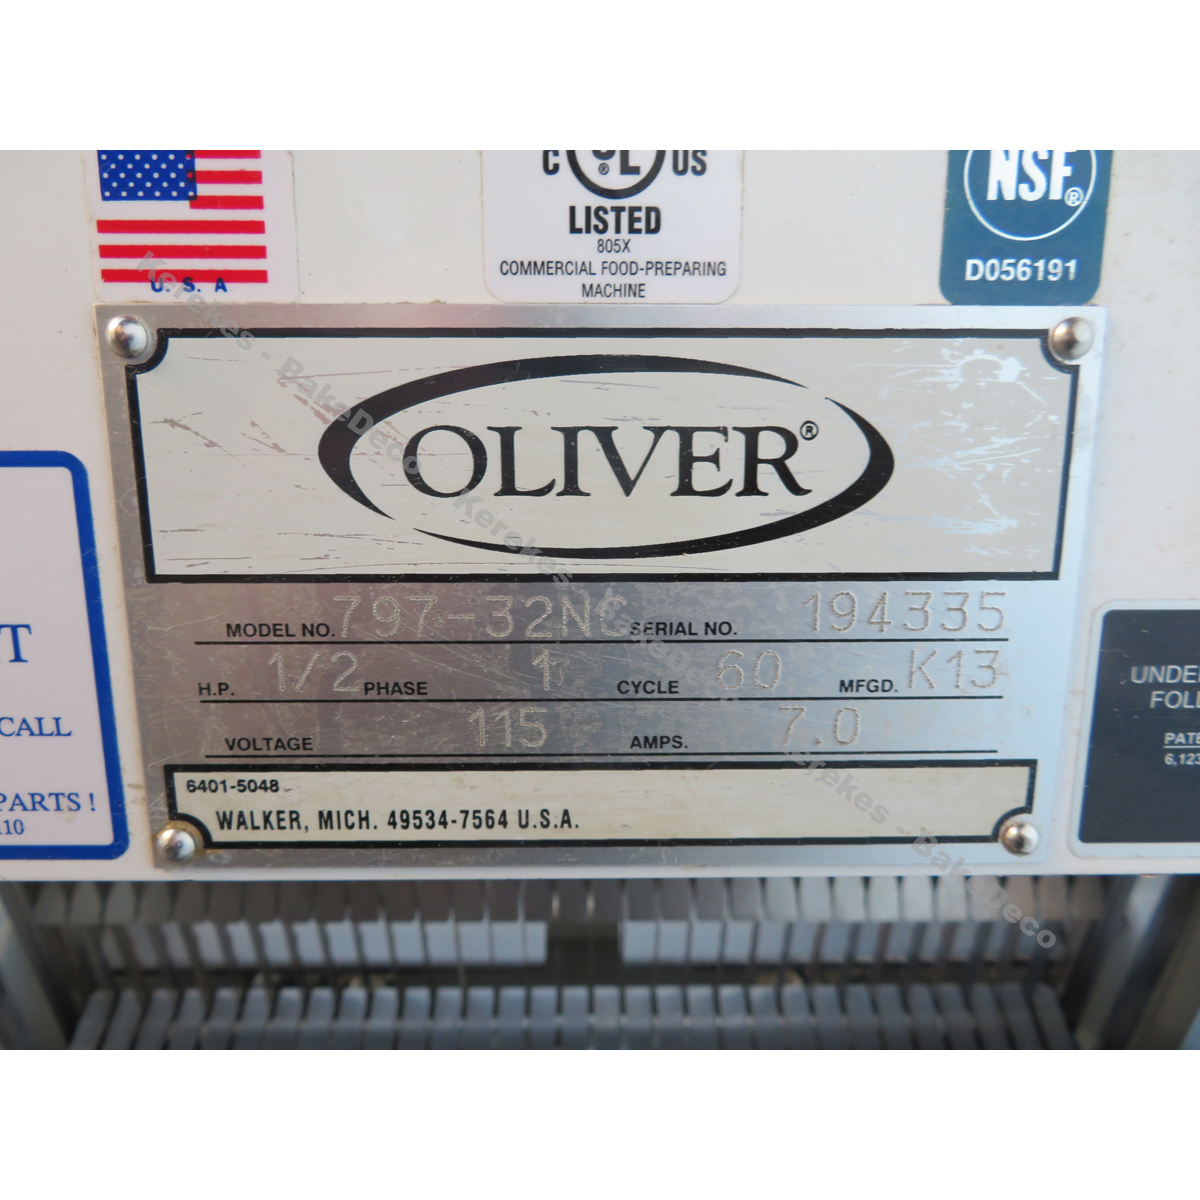 Oliver 797-32NC Bread Slicer 1/2" Cut, Used Excellent Condition image 4